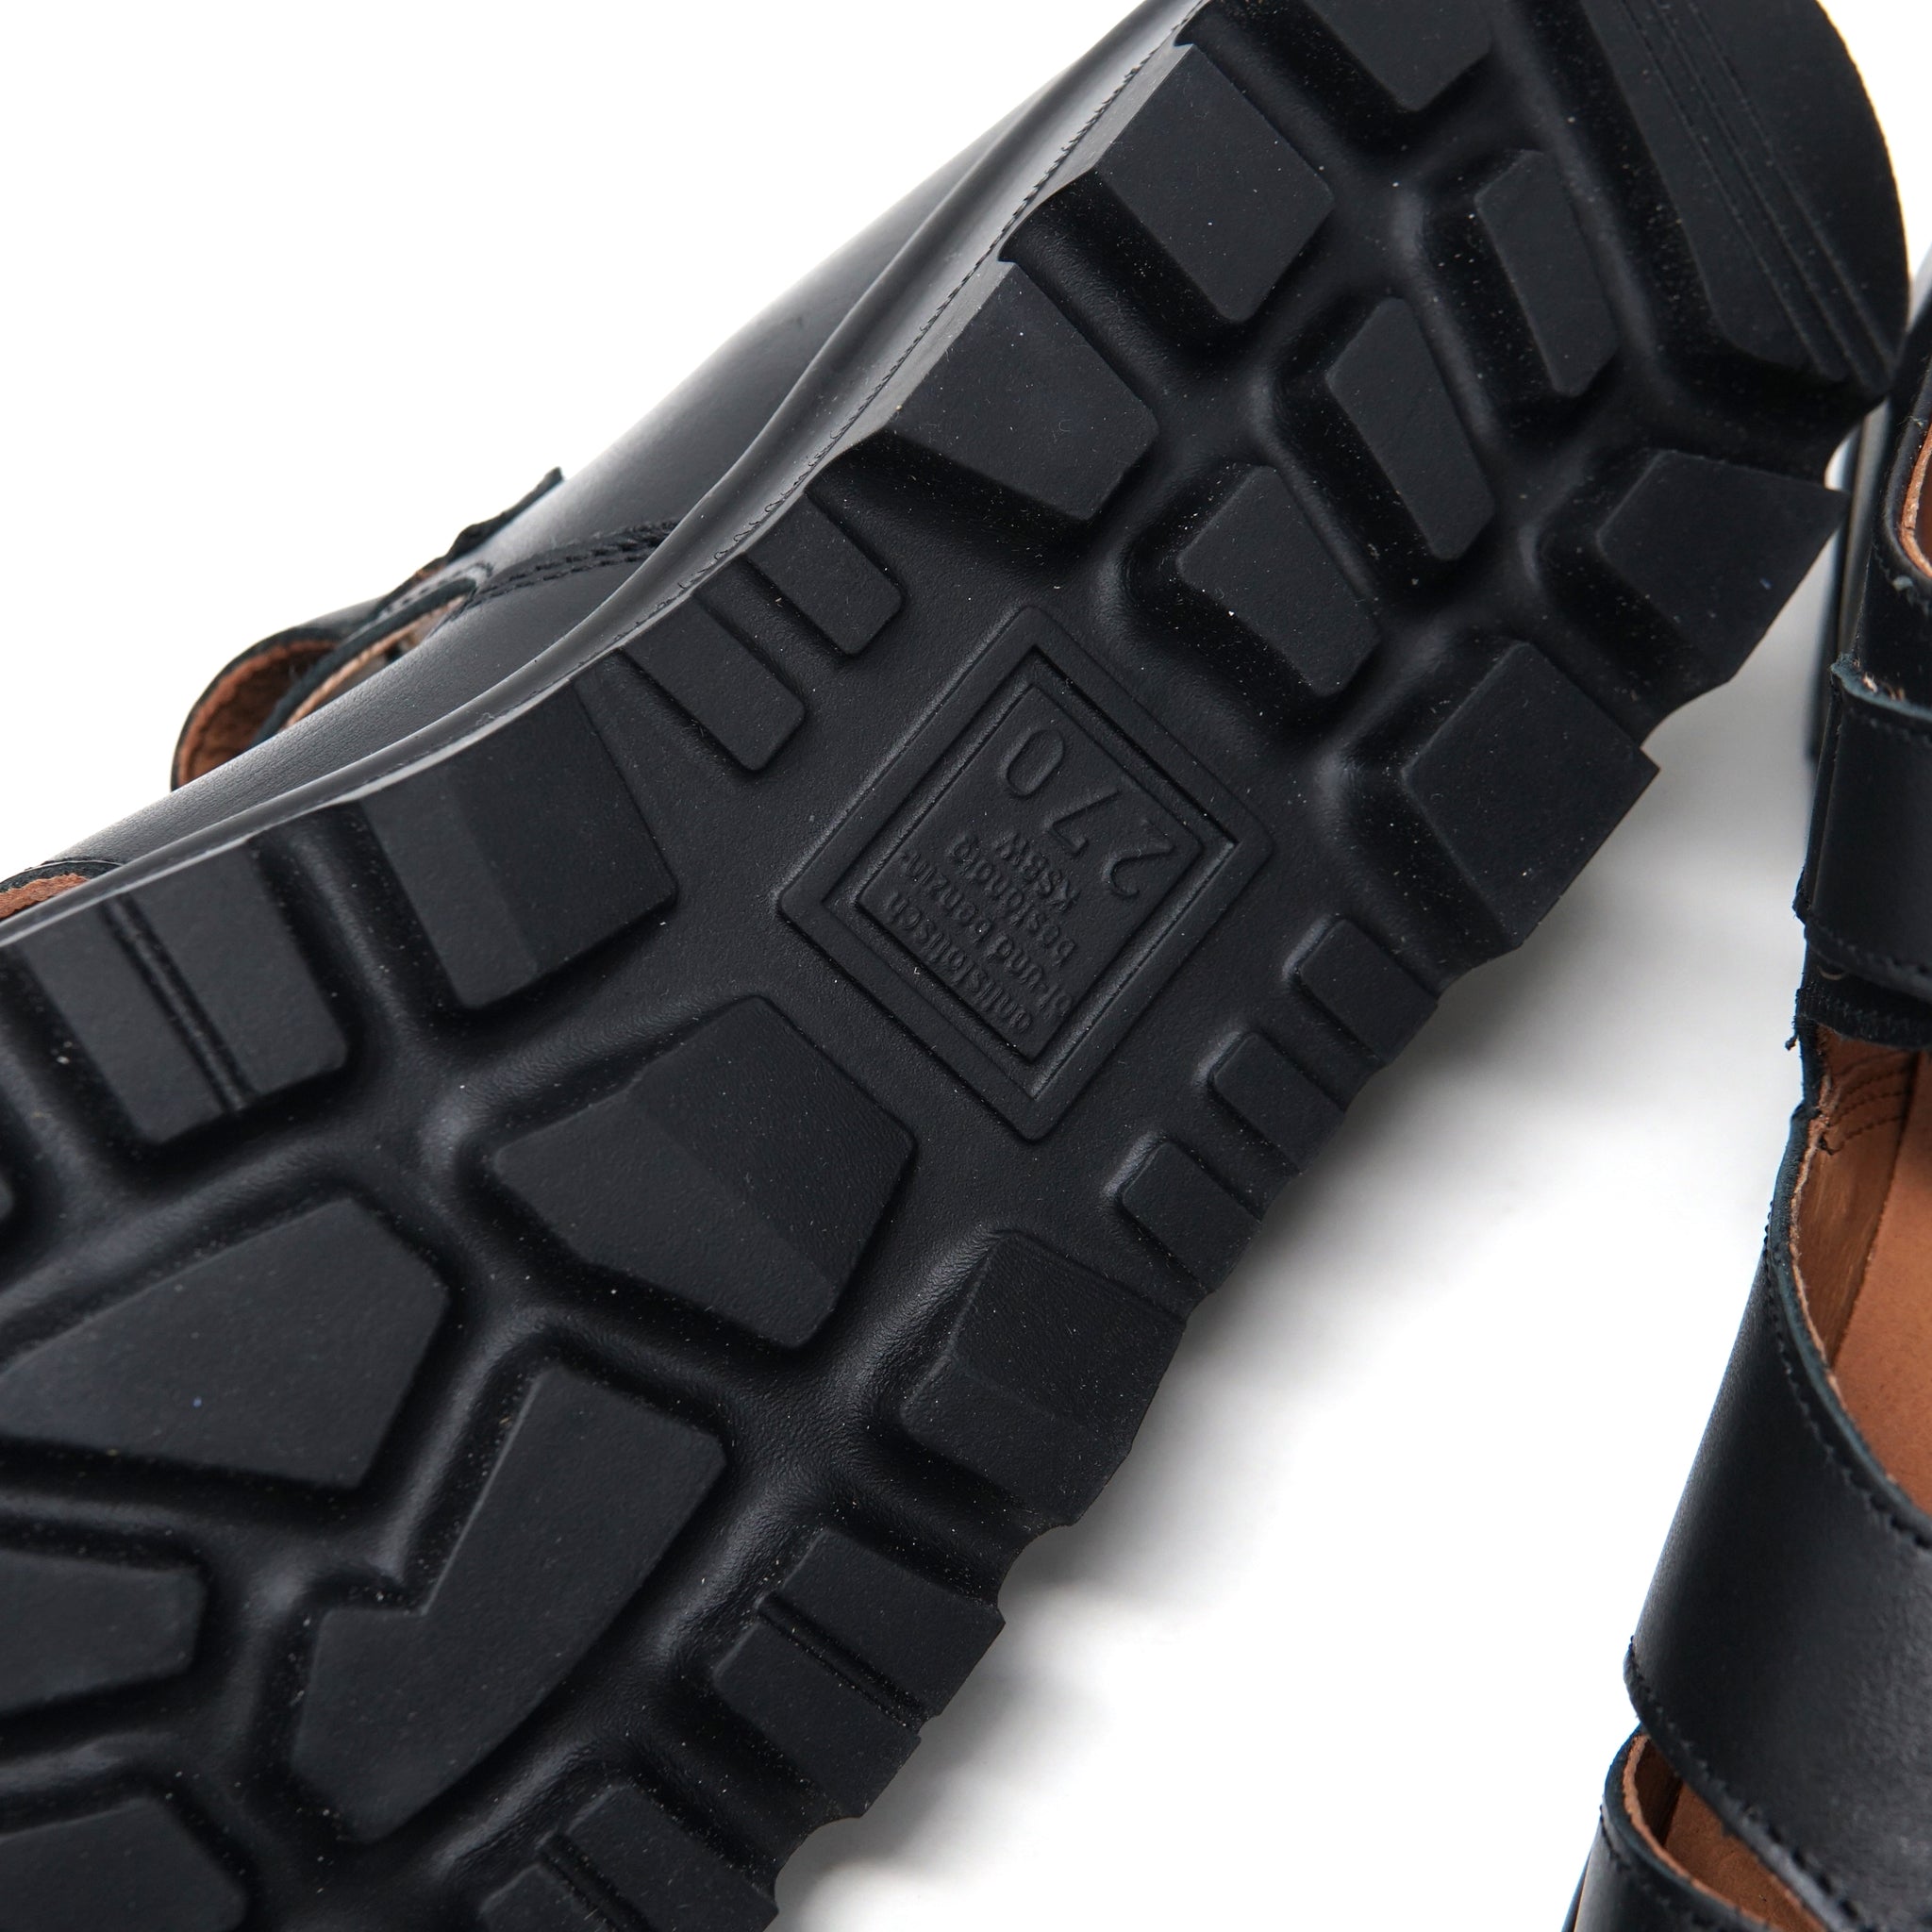 No:959L | Name:ITALIAN MILITARY SANDAL | Color:Black【REPRODUCTION OF FOUND_リプロダクションオブファウンド】